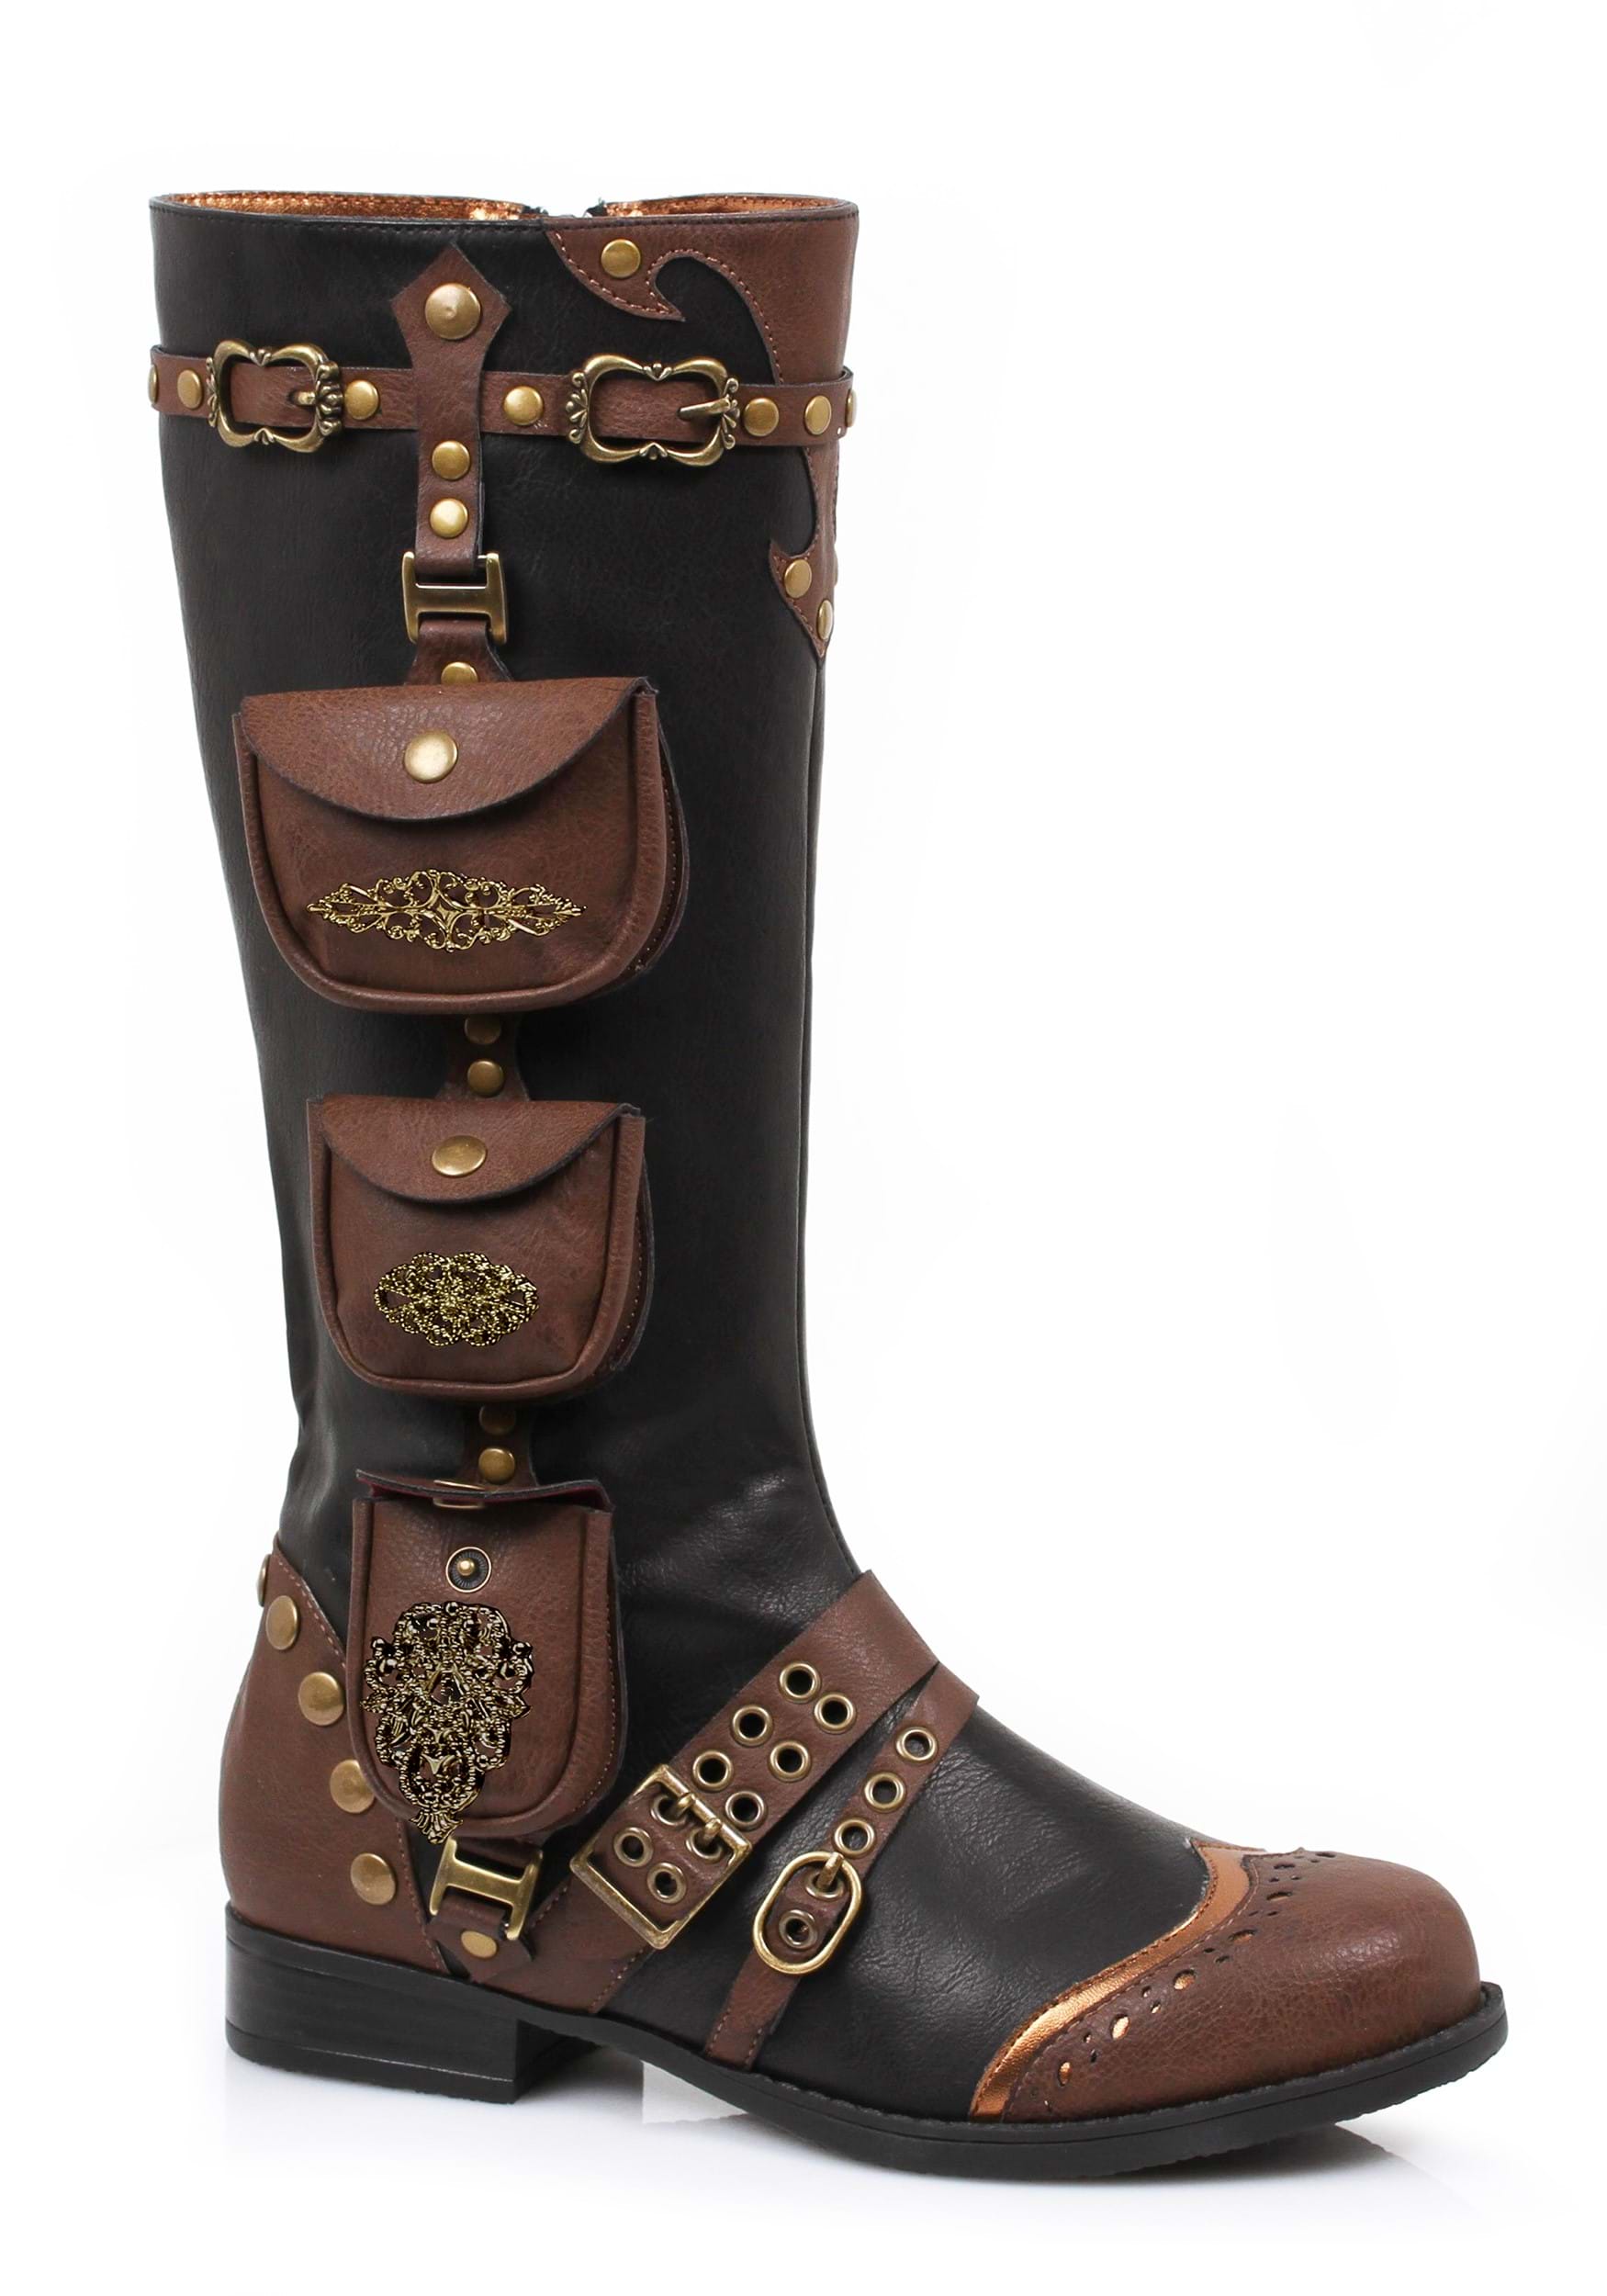 https://images.halloweencostumes.com/products/72377/1-1/womens-steampunk-boots.jpg